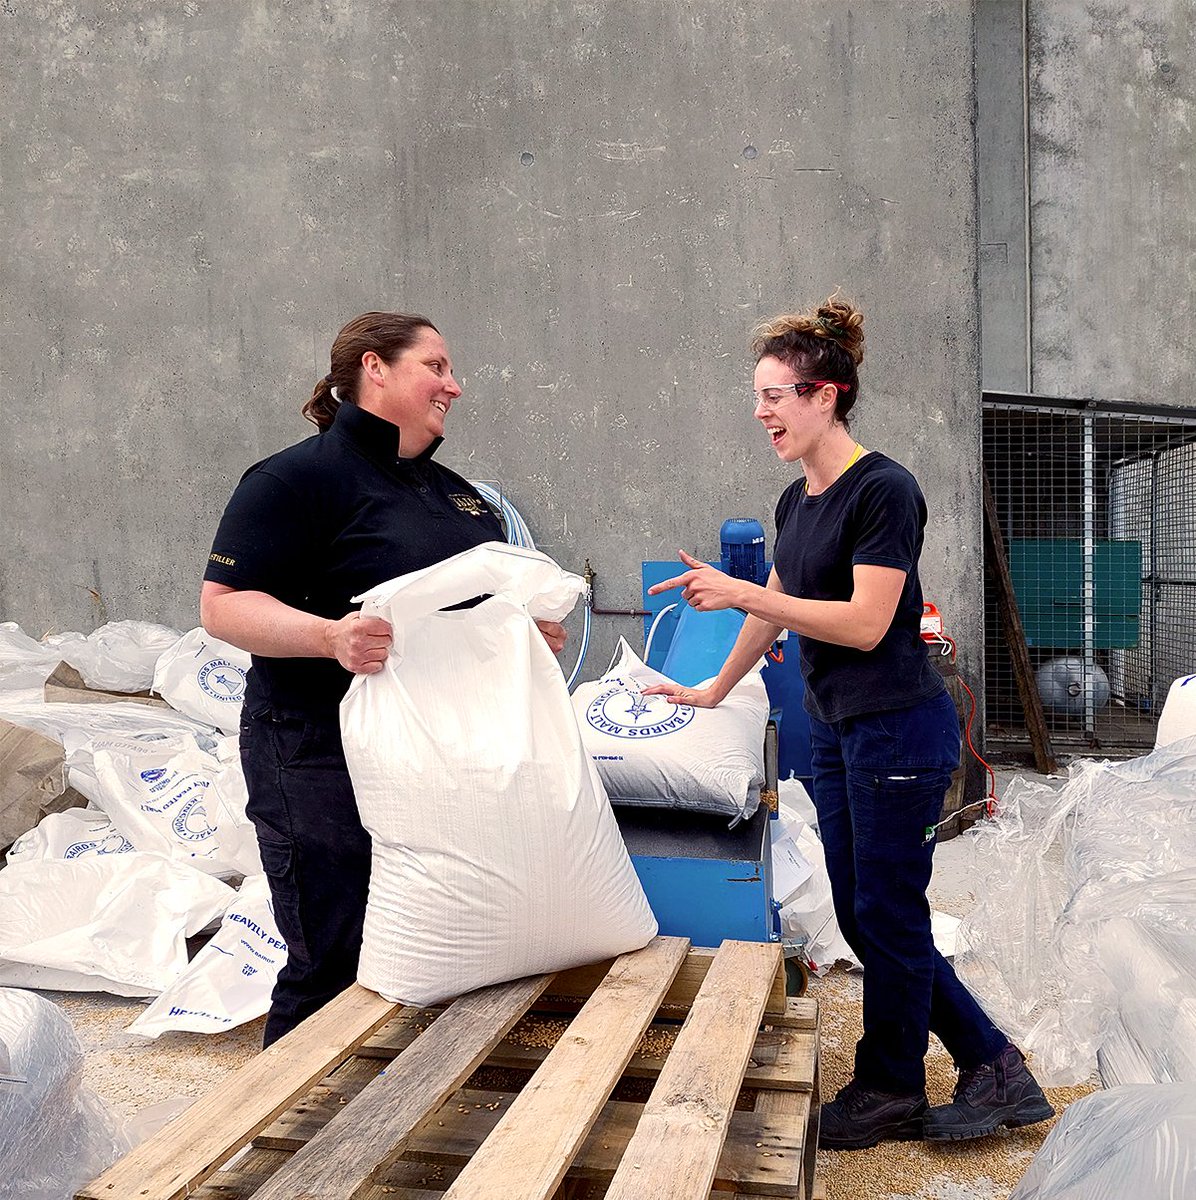 Our people are the beating heart of our business. They make the hard work fun. They bring passion, craft, character and dedication to everything we do. Their skills and experiences extend further than the art of distilling. #peoplefirst #challengethenorm #journey #intotheunknown